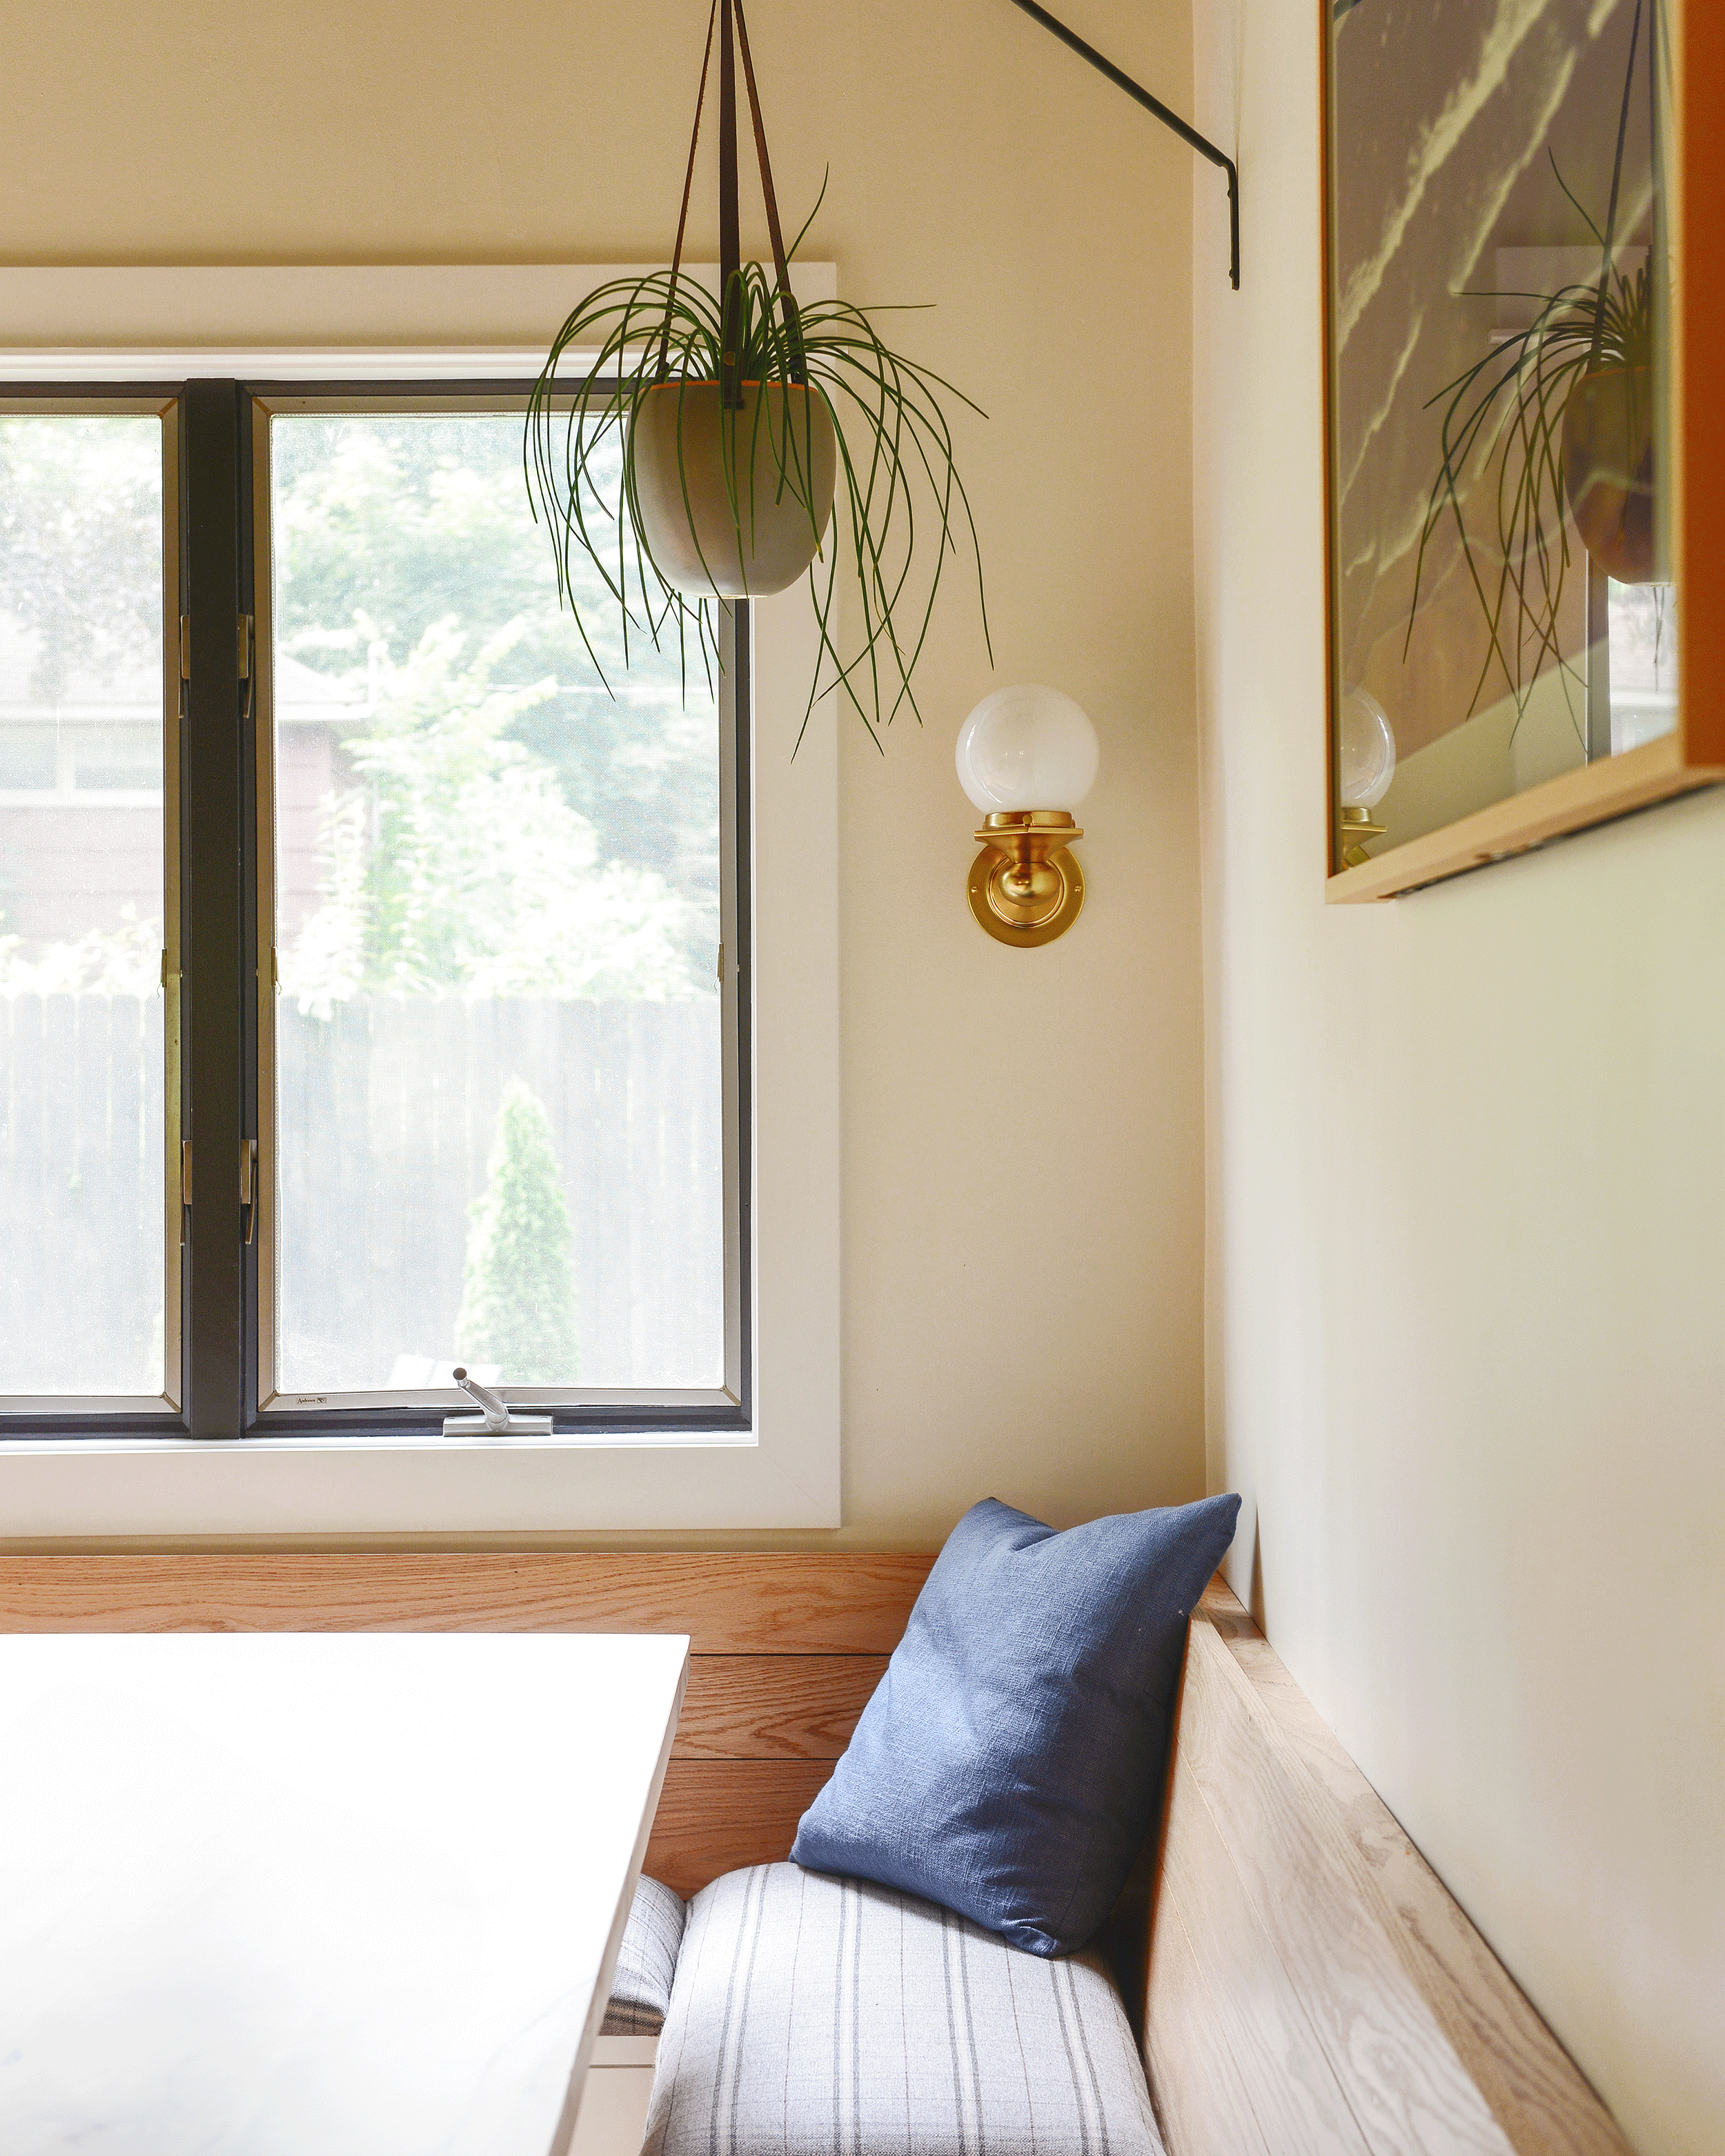 How to Choose a Wall Sconce + Why You Need One // Plus a round-up of sconces for your own home! // via Yellow Brick Home